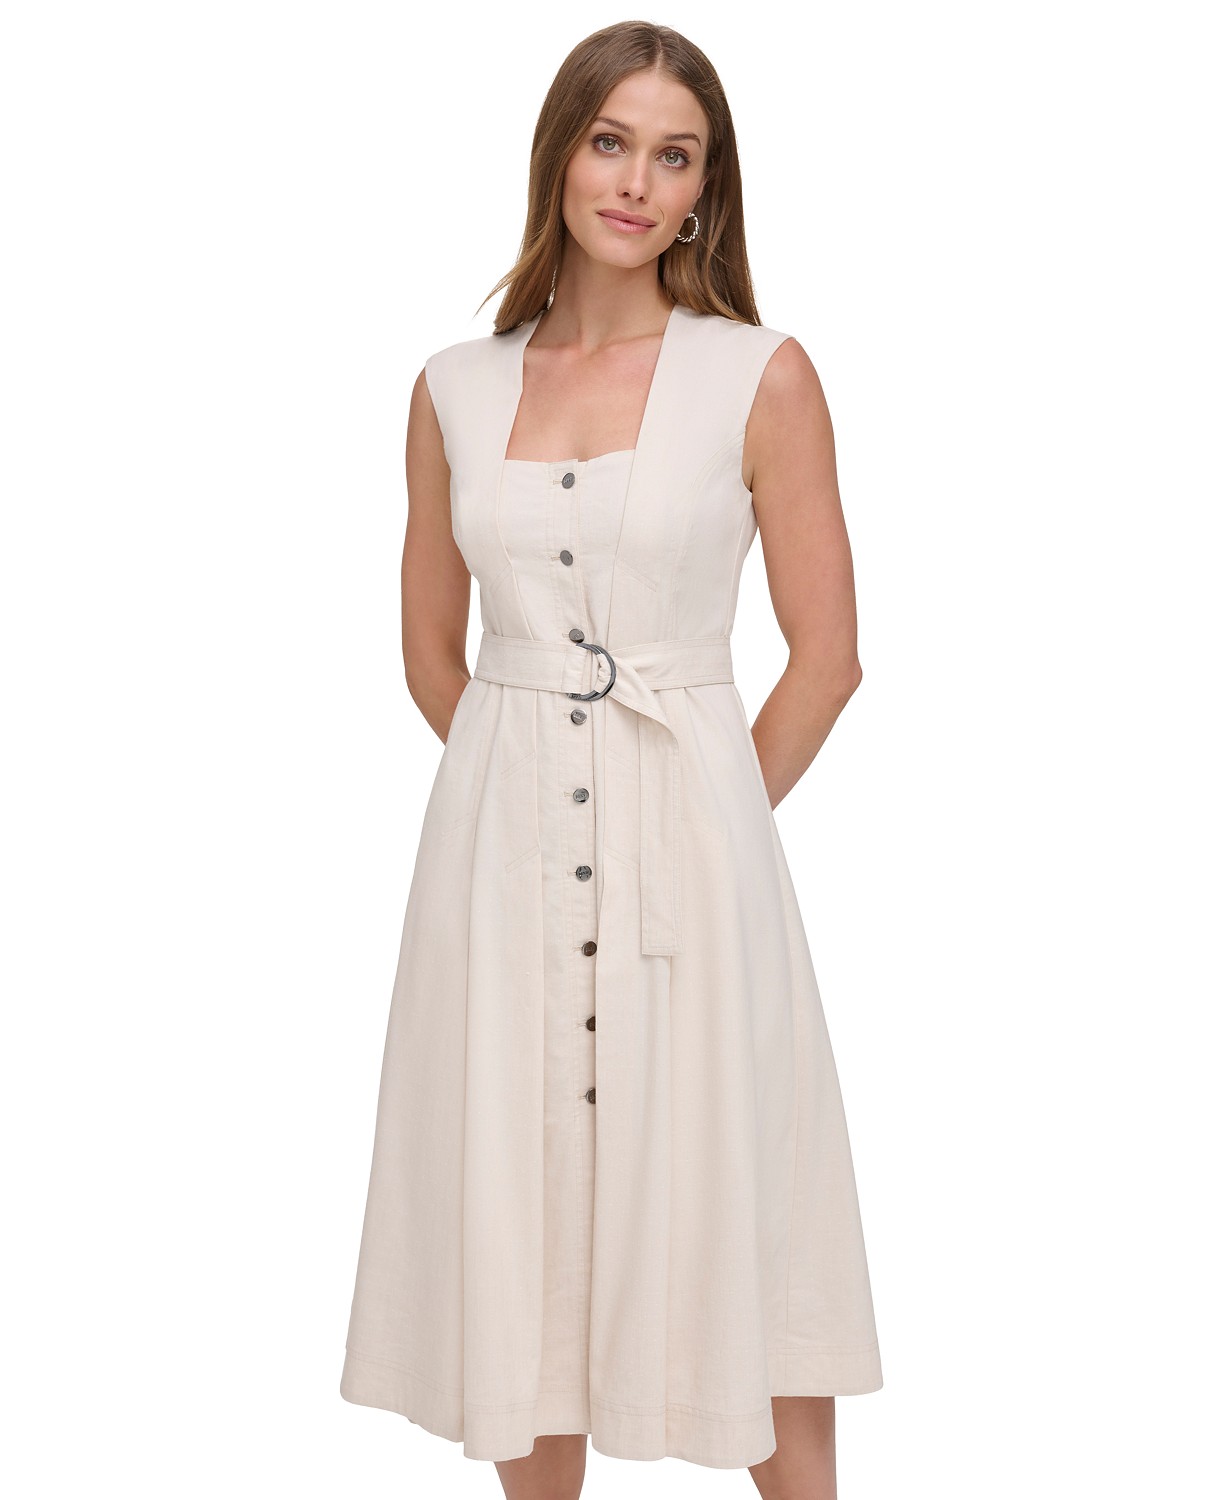 DKNY Womens Belted Button-Front Midi Dress